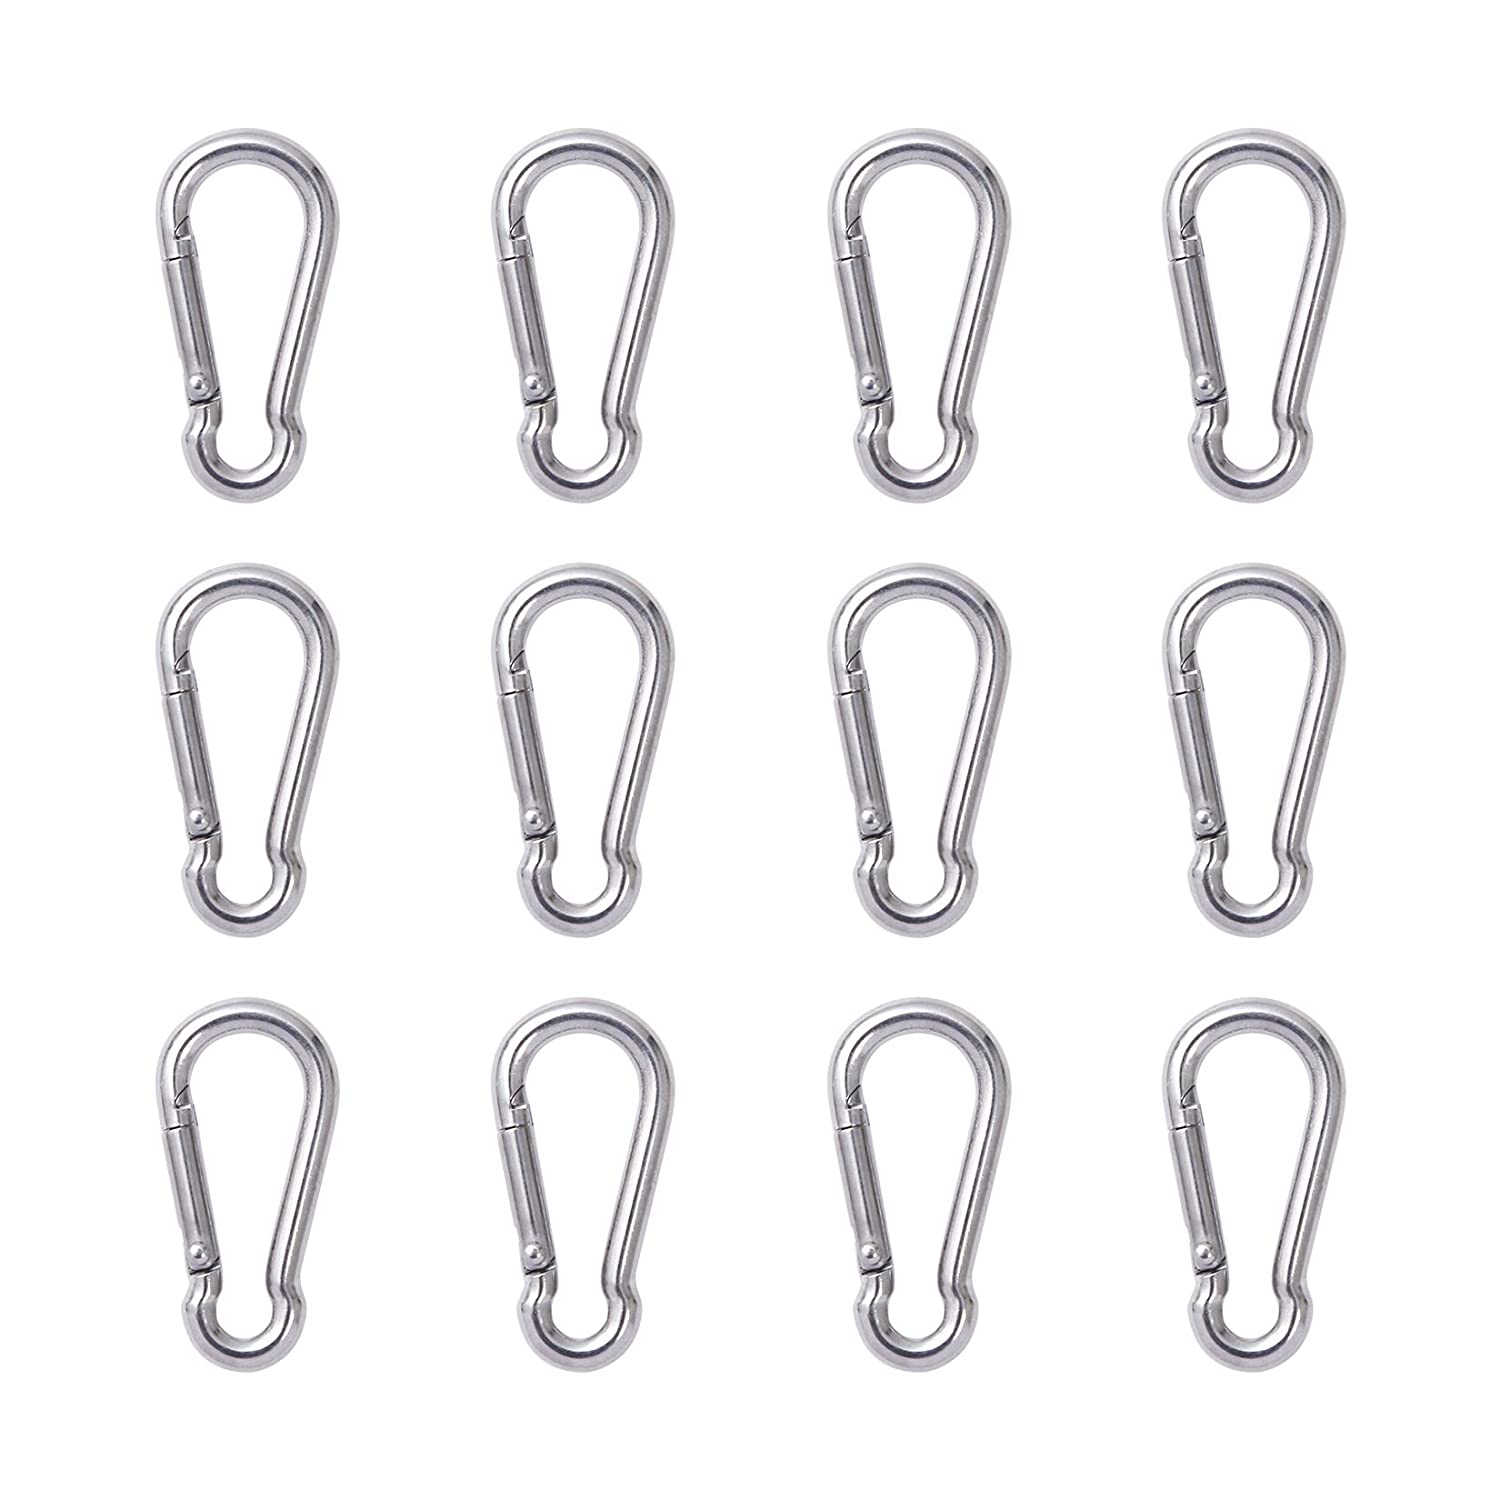  Mini Carabiner Clip Spring Snap Hook Buckle Clasps for